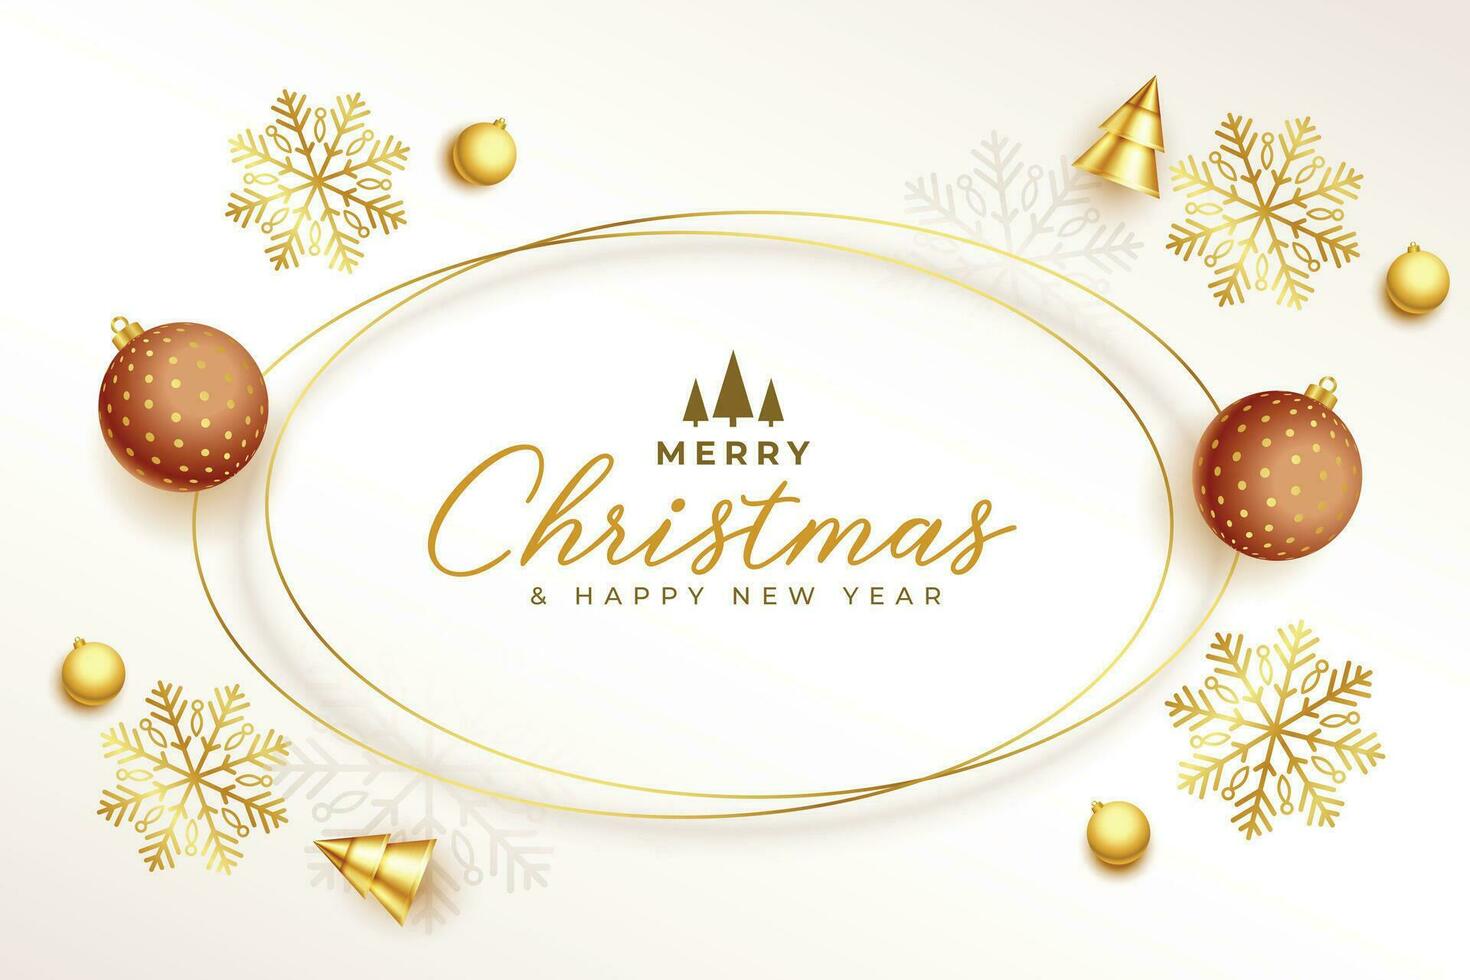 merry christmas celebration nice greeting with xmas objects and elements vector